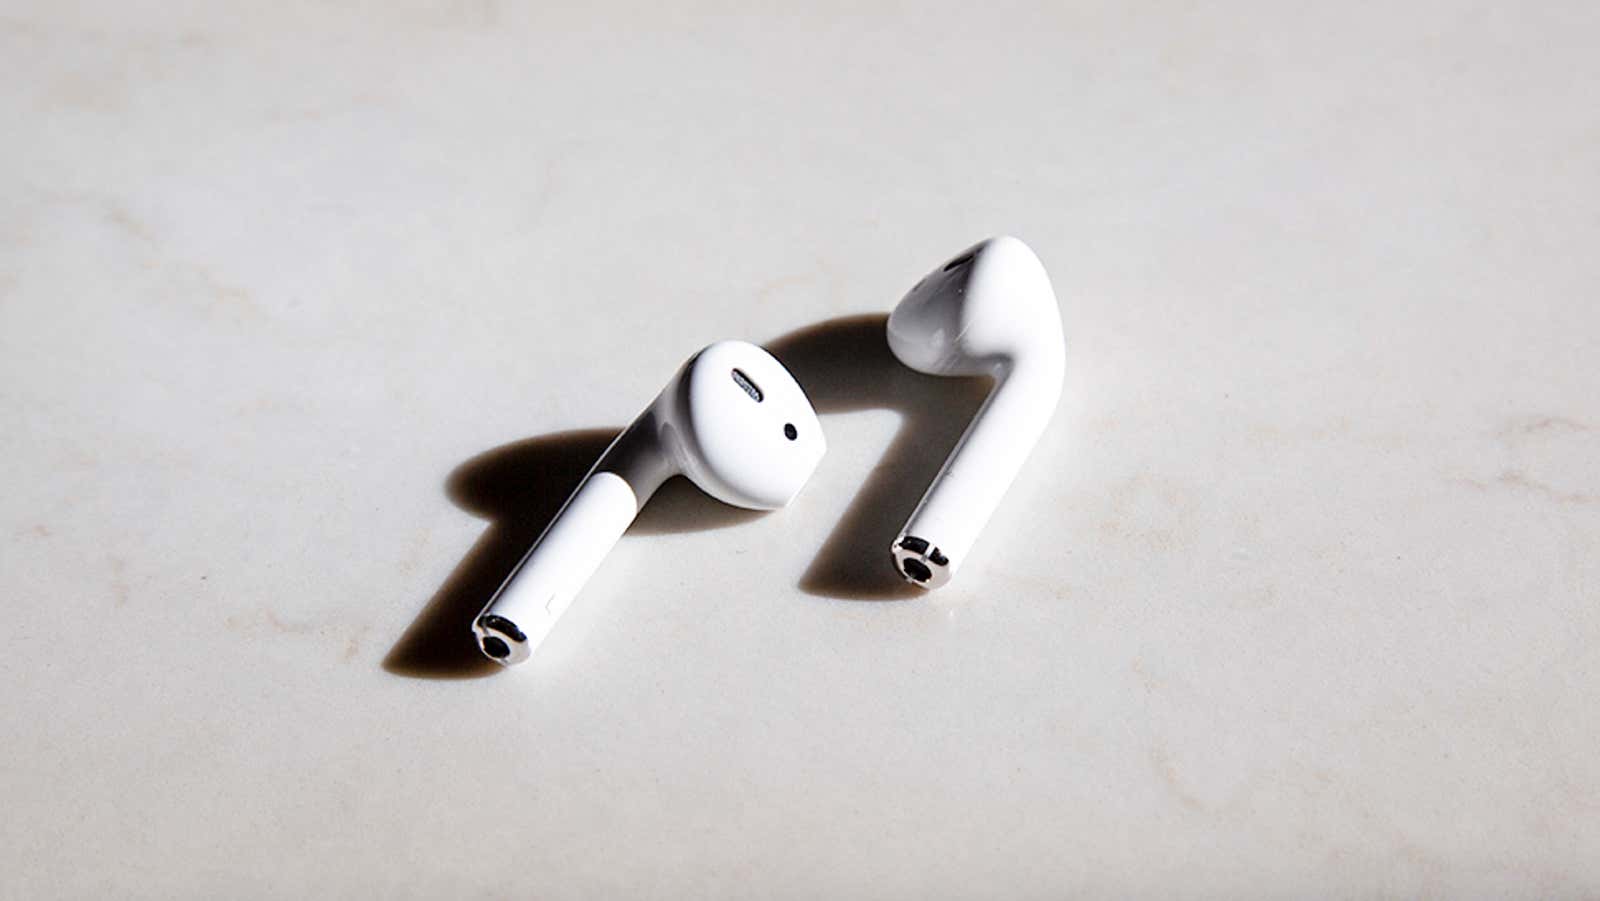 Think these, but with smaller stems. (Photo: Adam Clark Estes/Gizmodo)